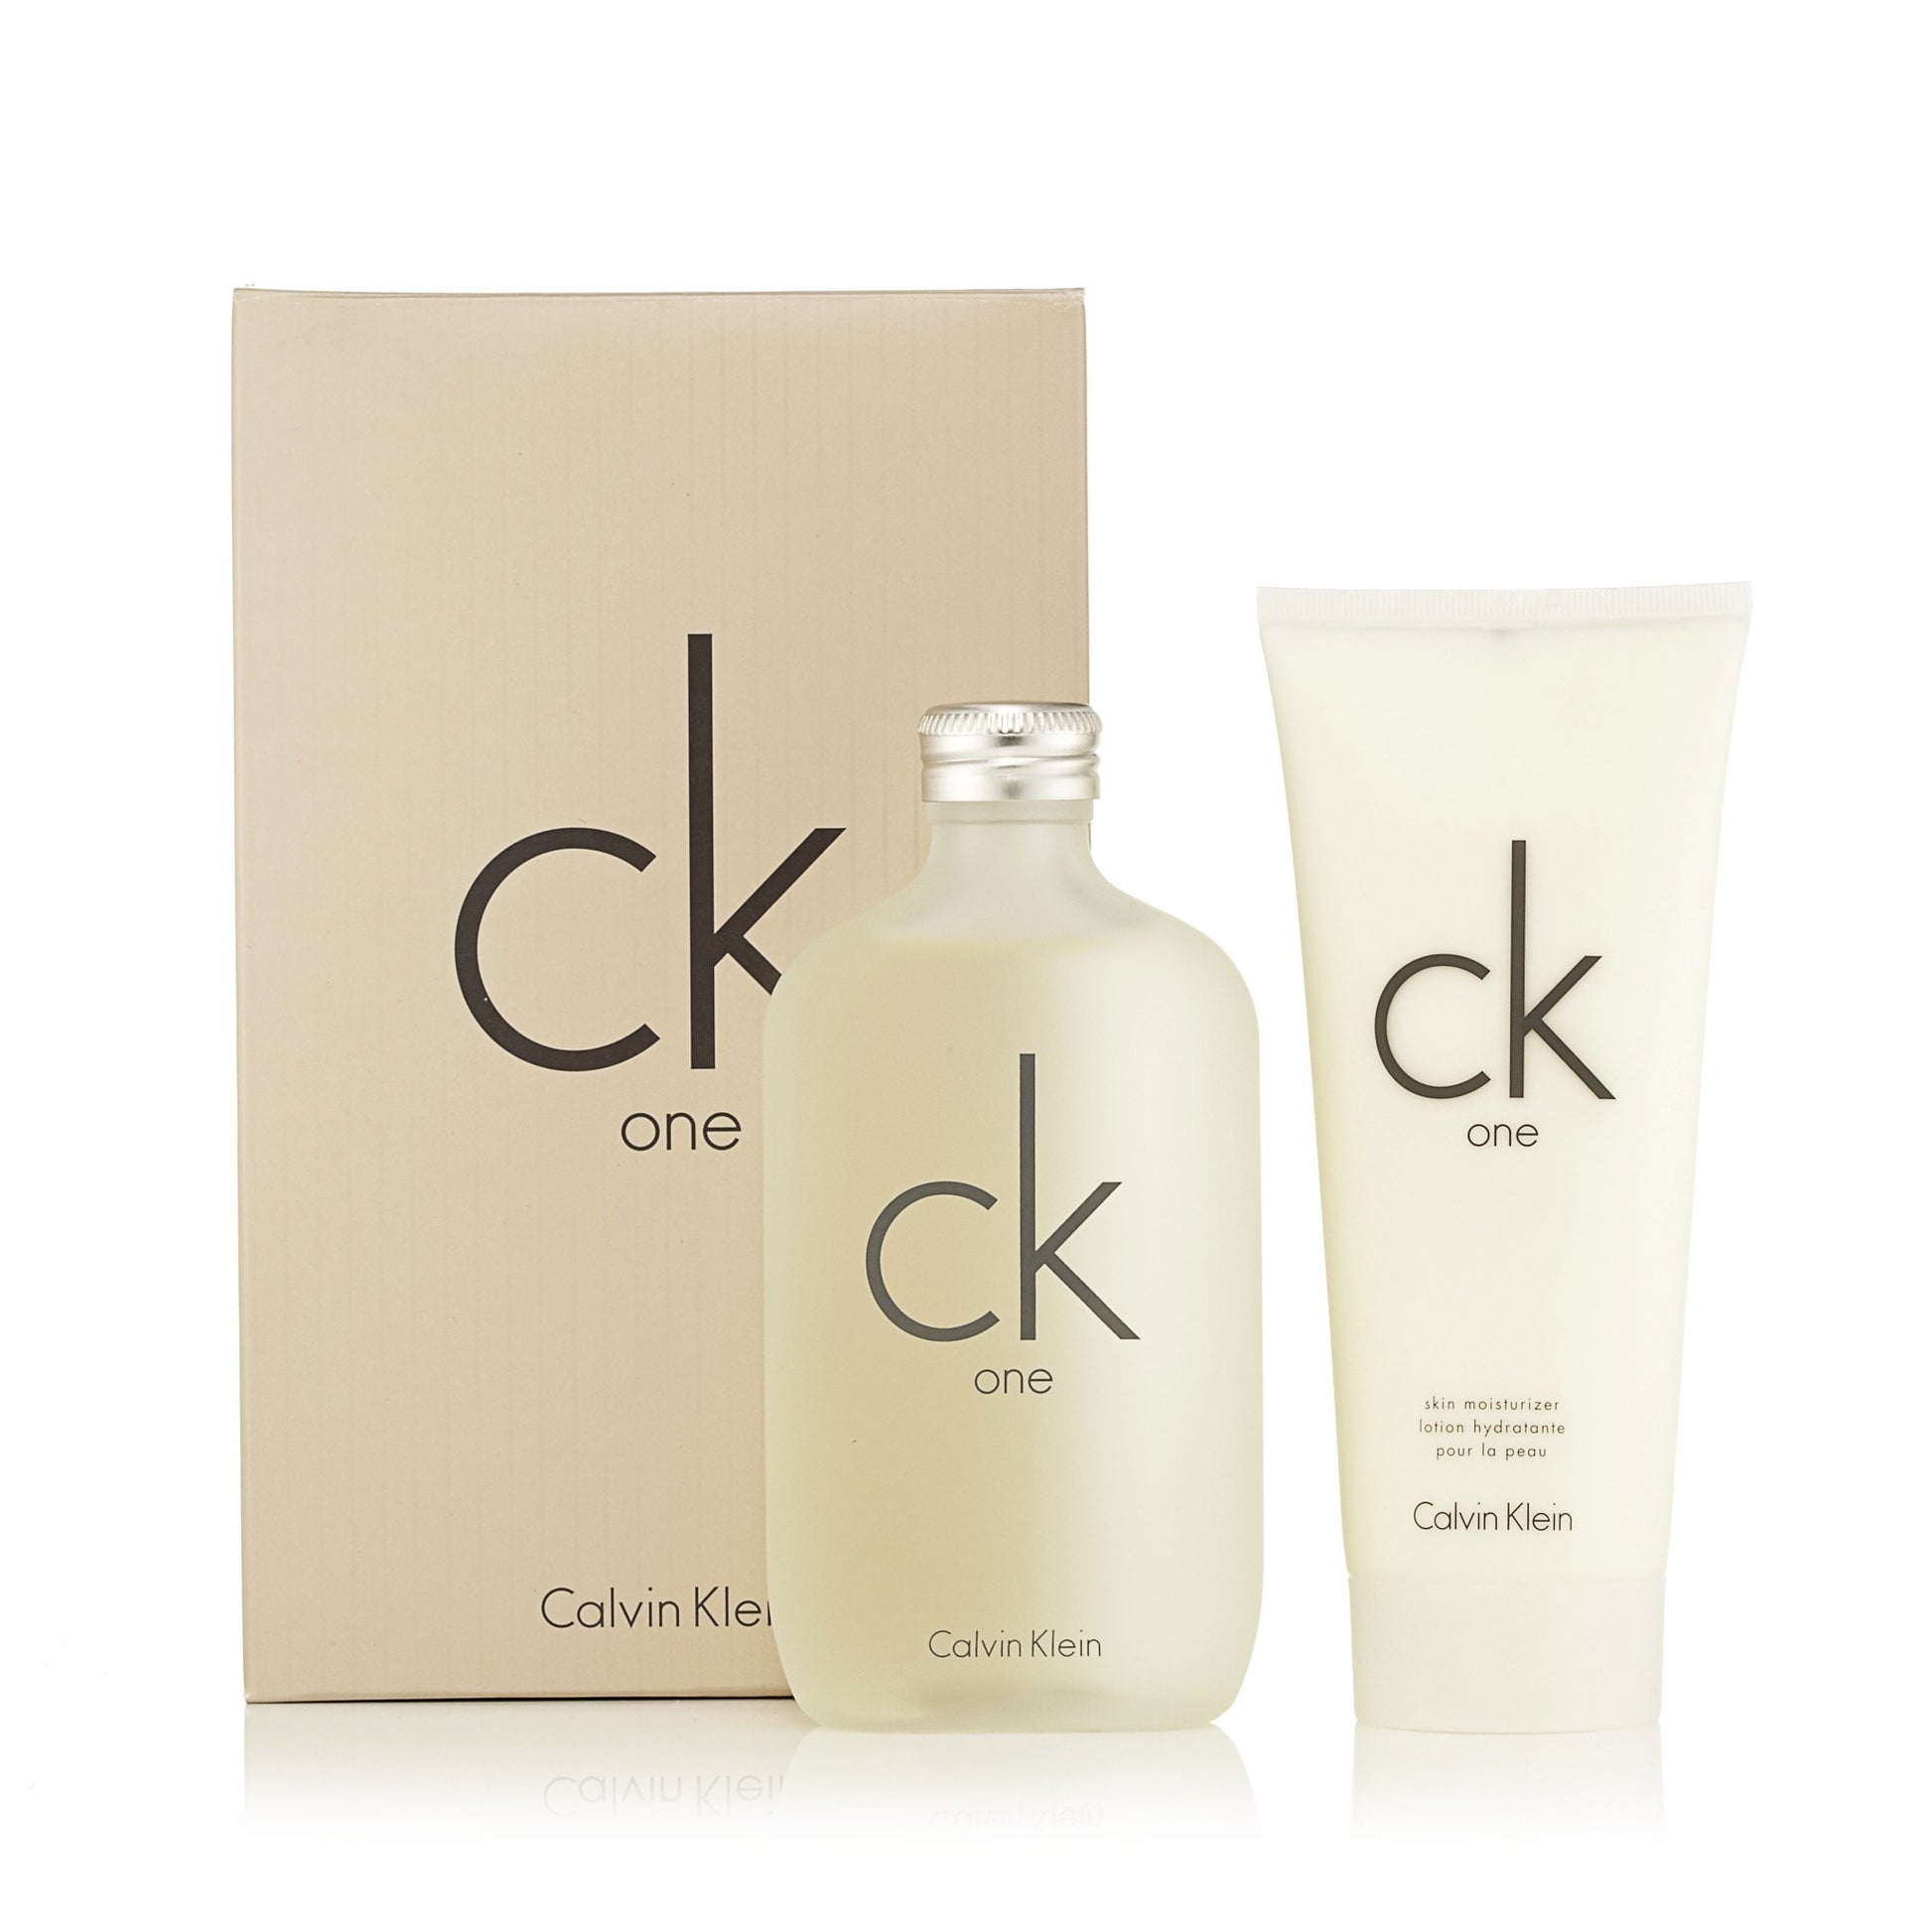 CK One Gift Set EDT and Skin Moisturizer for Women and Men by Calvin Klein 6.7 oz. Click to open in modal